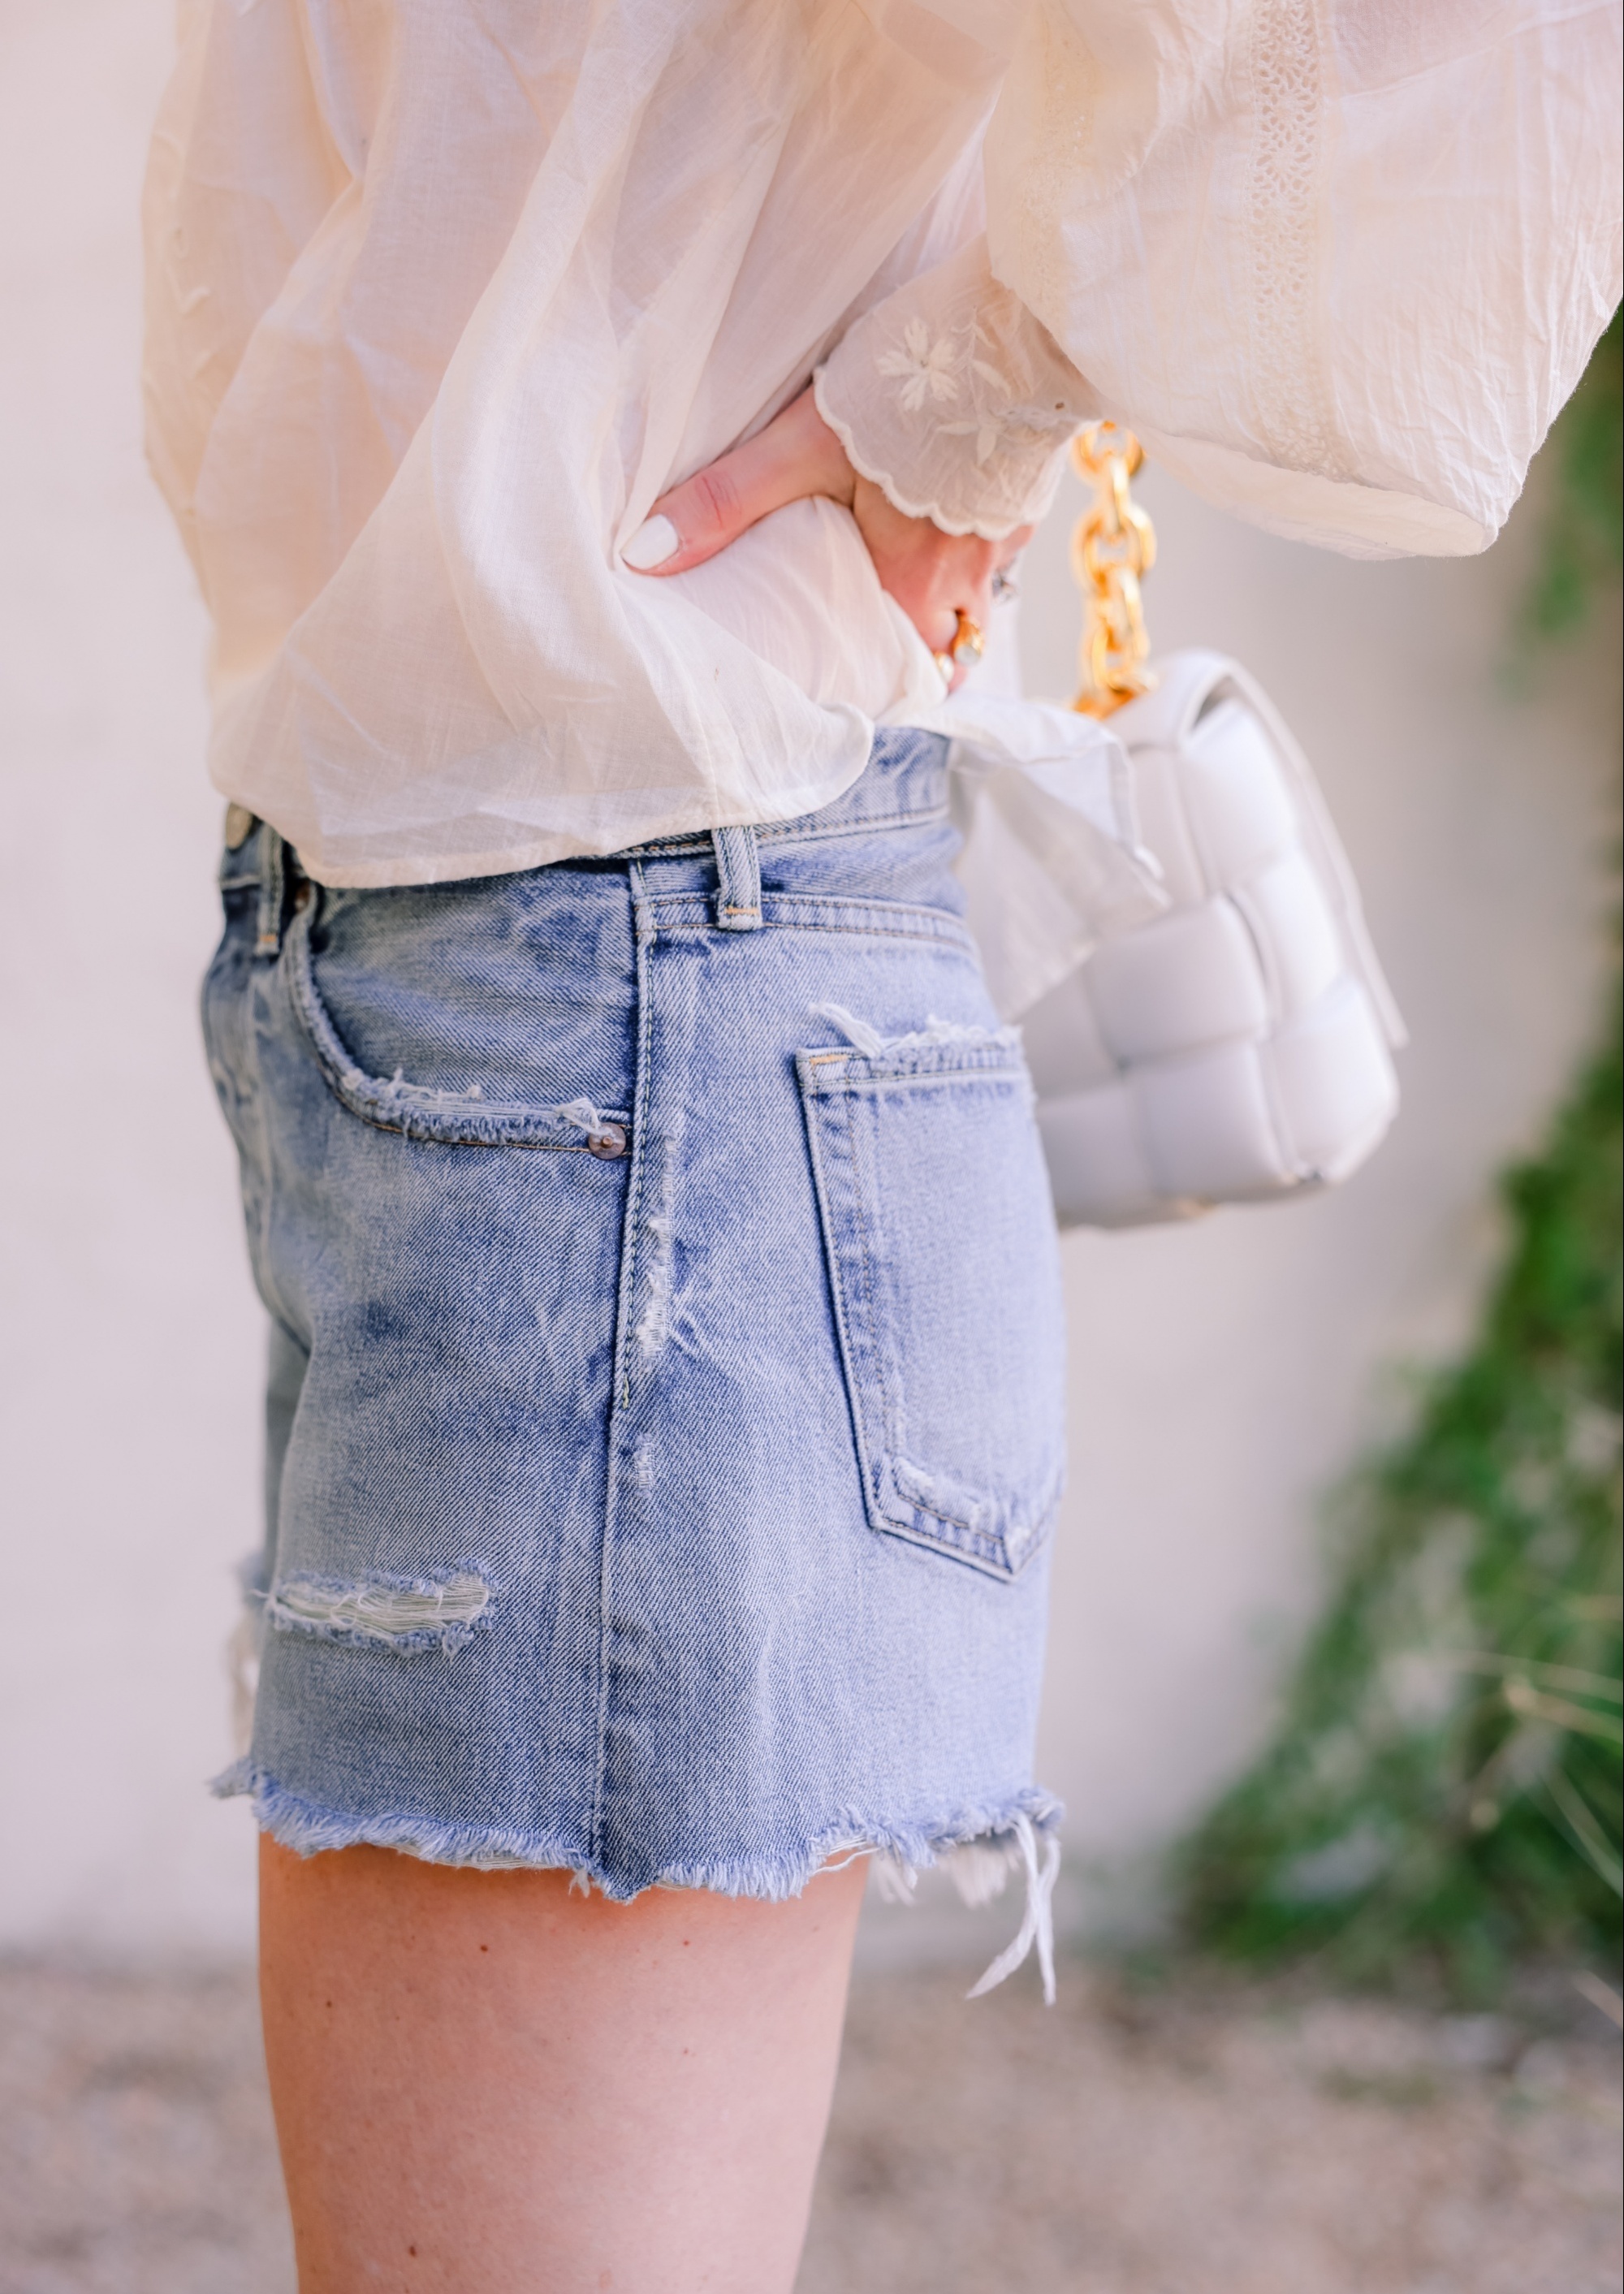 Moussy Vintage denim shorts, Erin Busbee, jean shorts, how should denim shorts fit, shorts for middle aged woman, how to wear shorts over 40, length of shorts womens, shorts inseam guide womens, are my shorts too short, jean shorts outfit, cute shorts, mom shorts outfit